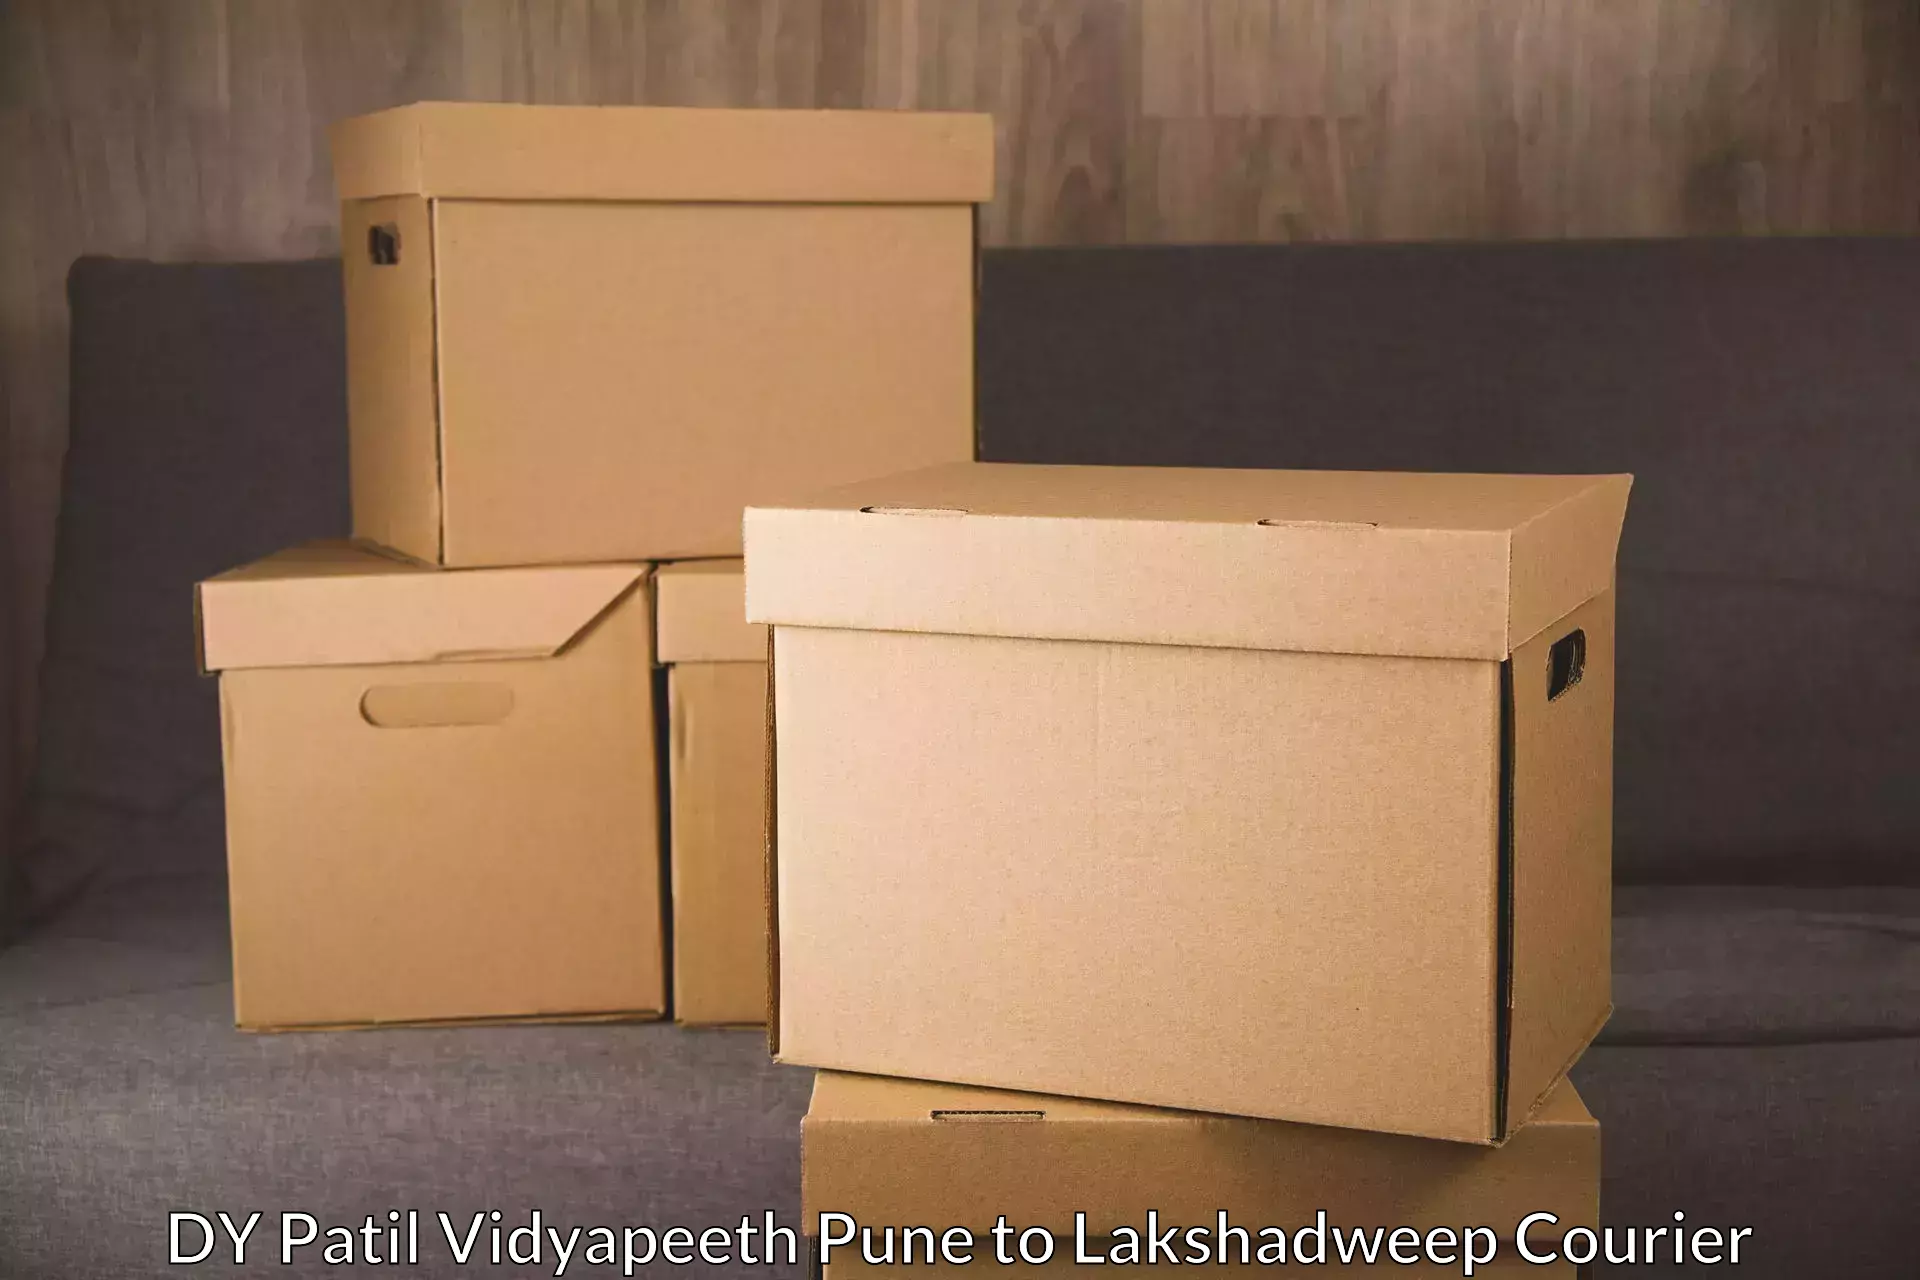 Courier service booking DY Patil Vidyapeeth Pune to Lakshadweep